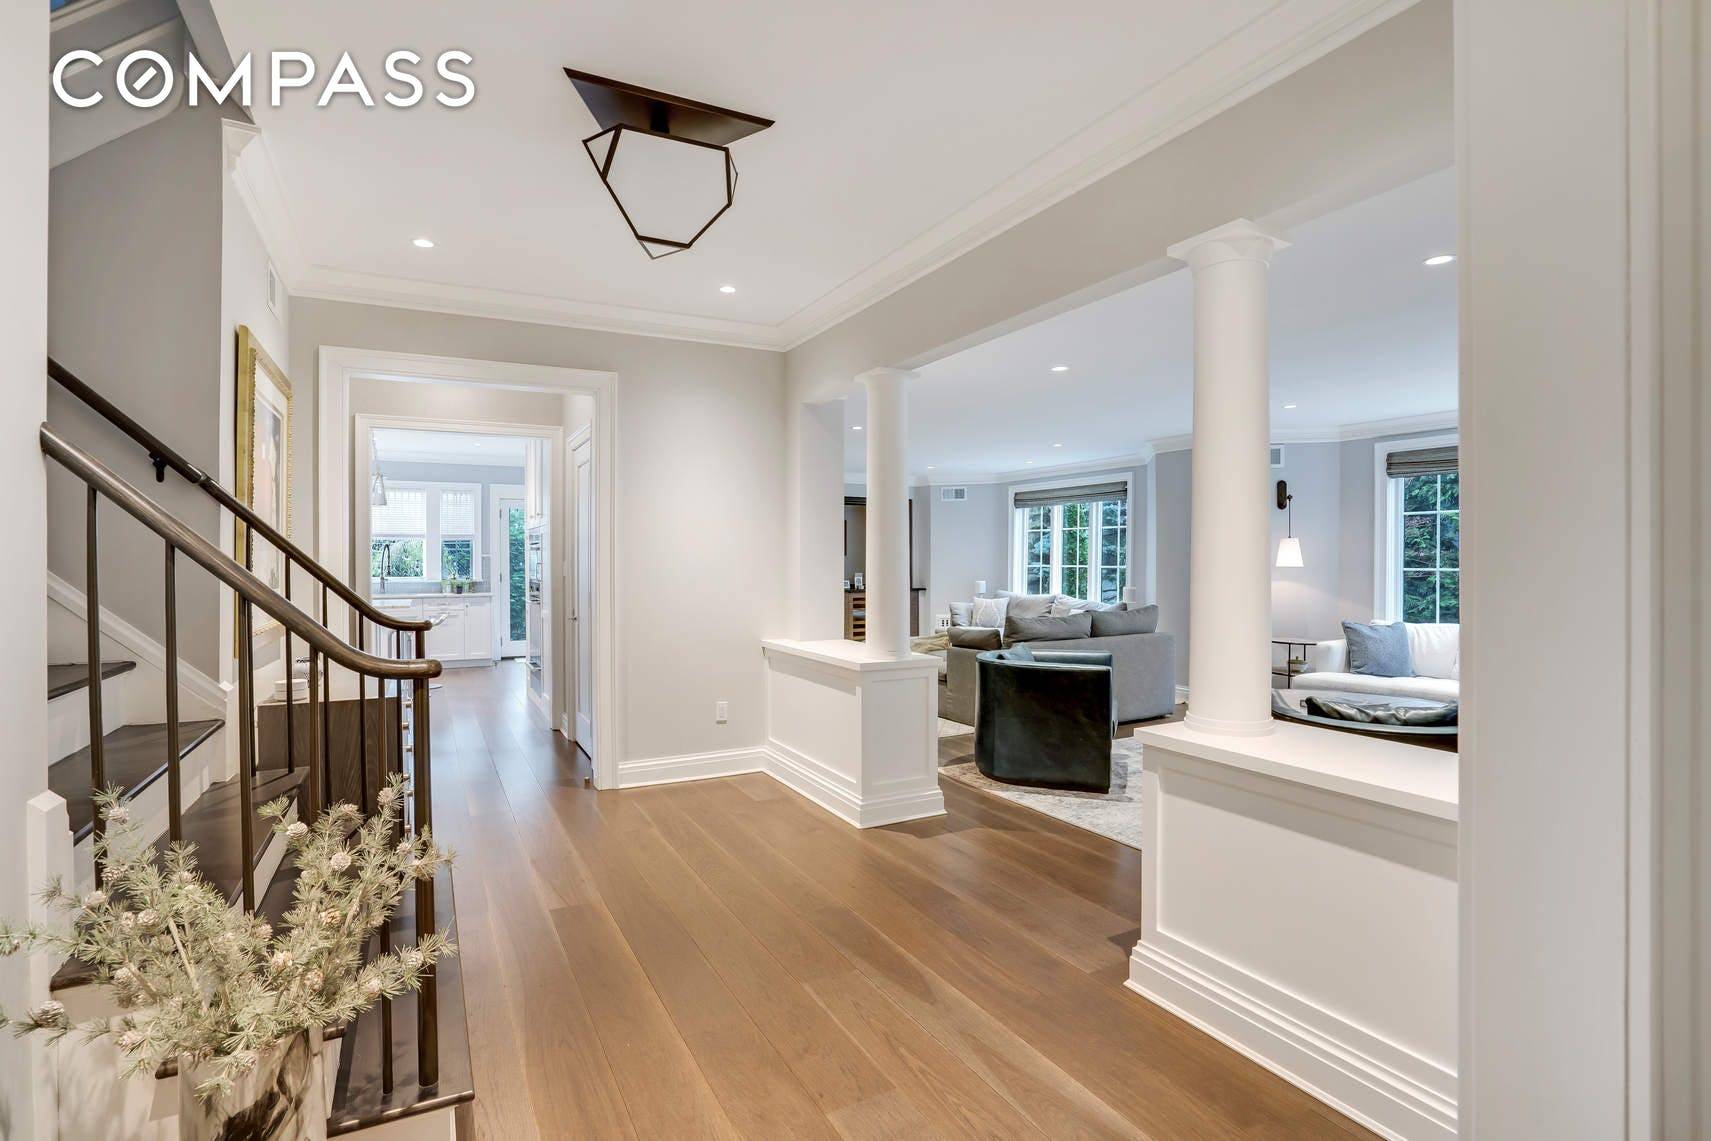 Situated on Bay Ridge's illustrious Mansion Block, this beautifully renovated six bedroom home dazzles with top of the line finishes and a tranquil backyard oasis.